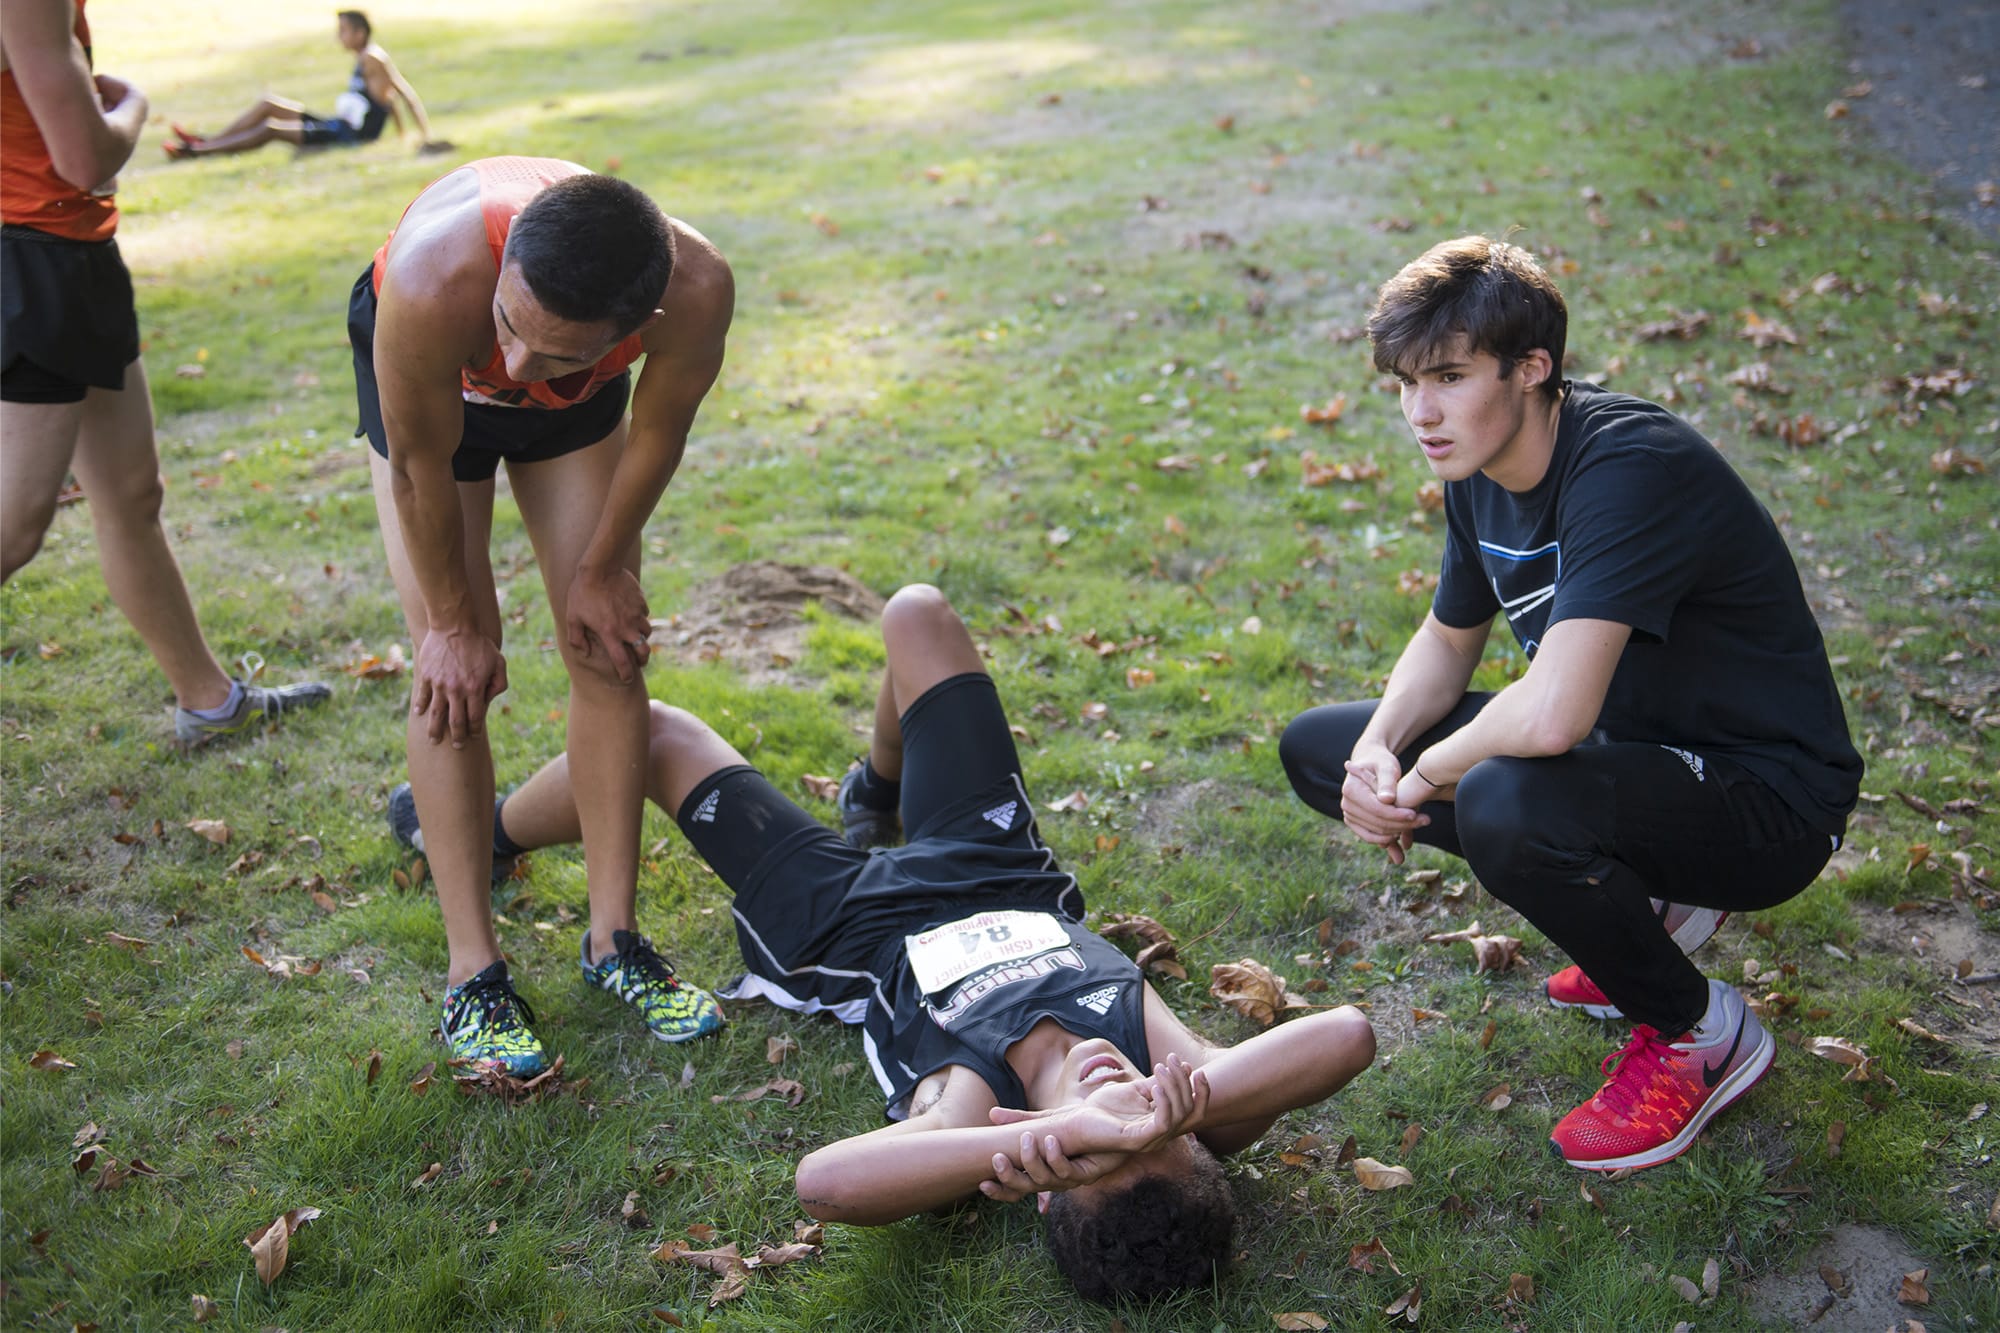 Battle Ground Runner Kyle Ganoung, from left, and Union Runner Andres Solorzano recover from their race with Union Alternate Runner Jaxon Milligan during the Boys 4A District Cross Country Championships at Lewisville Park on Thursday, afternoon, Oct. 18, 2018.